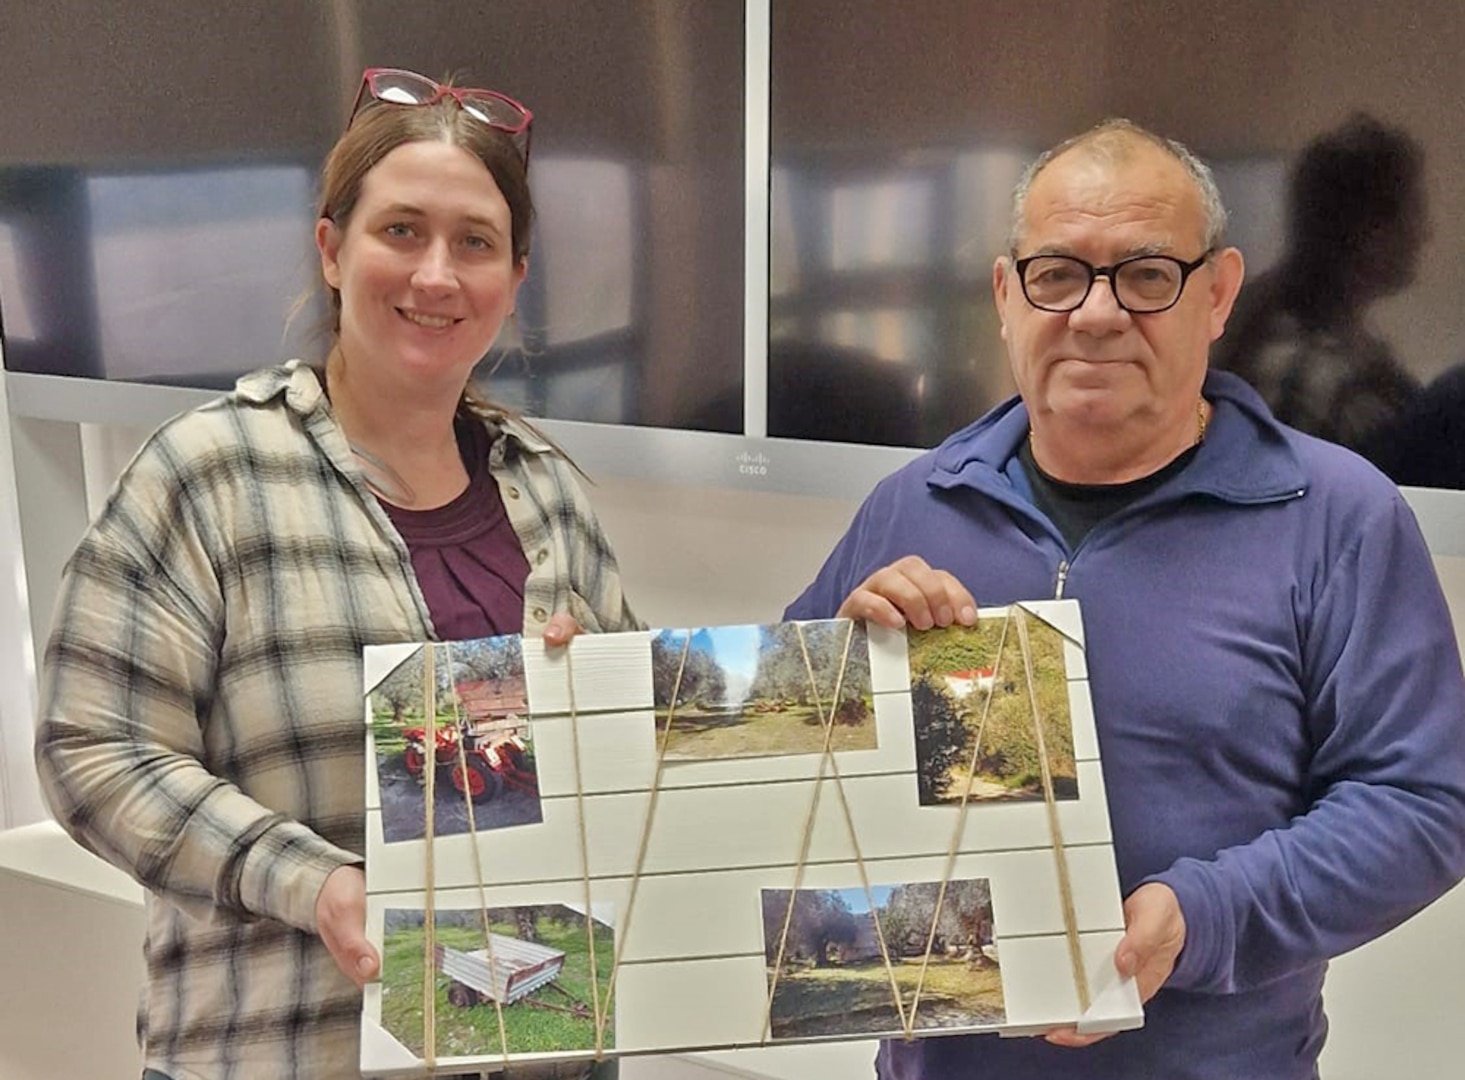 Two people pose with a memory board.